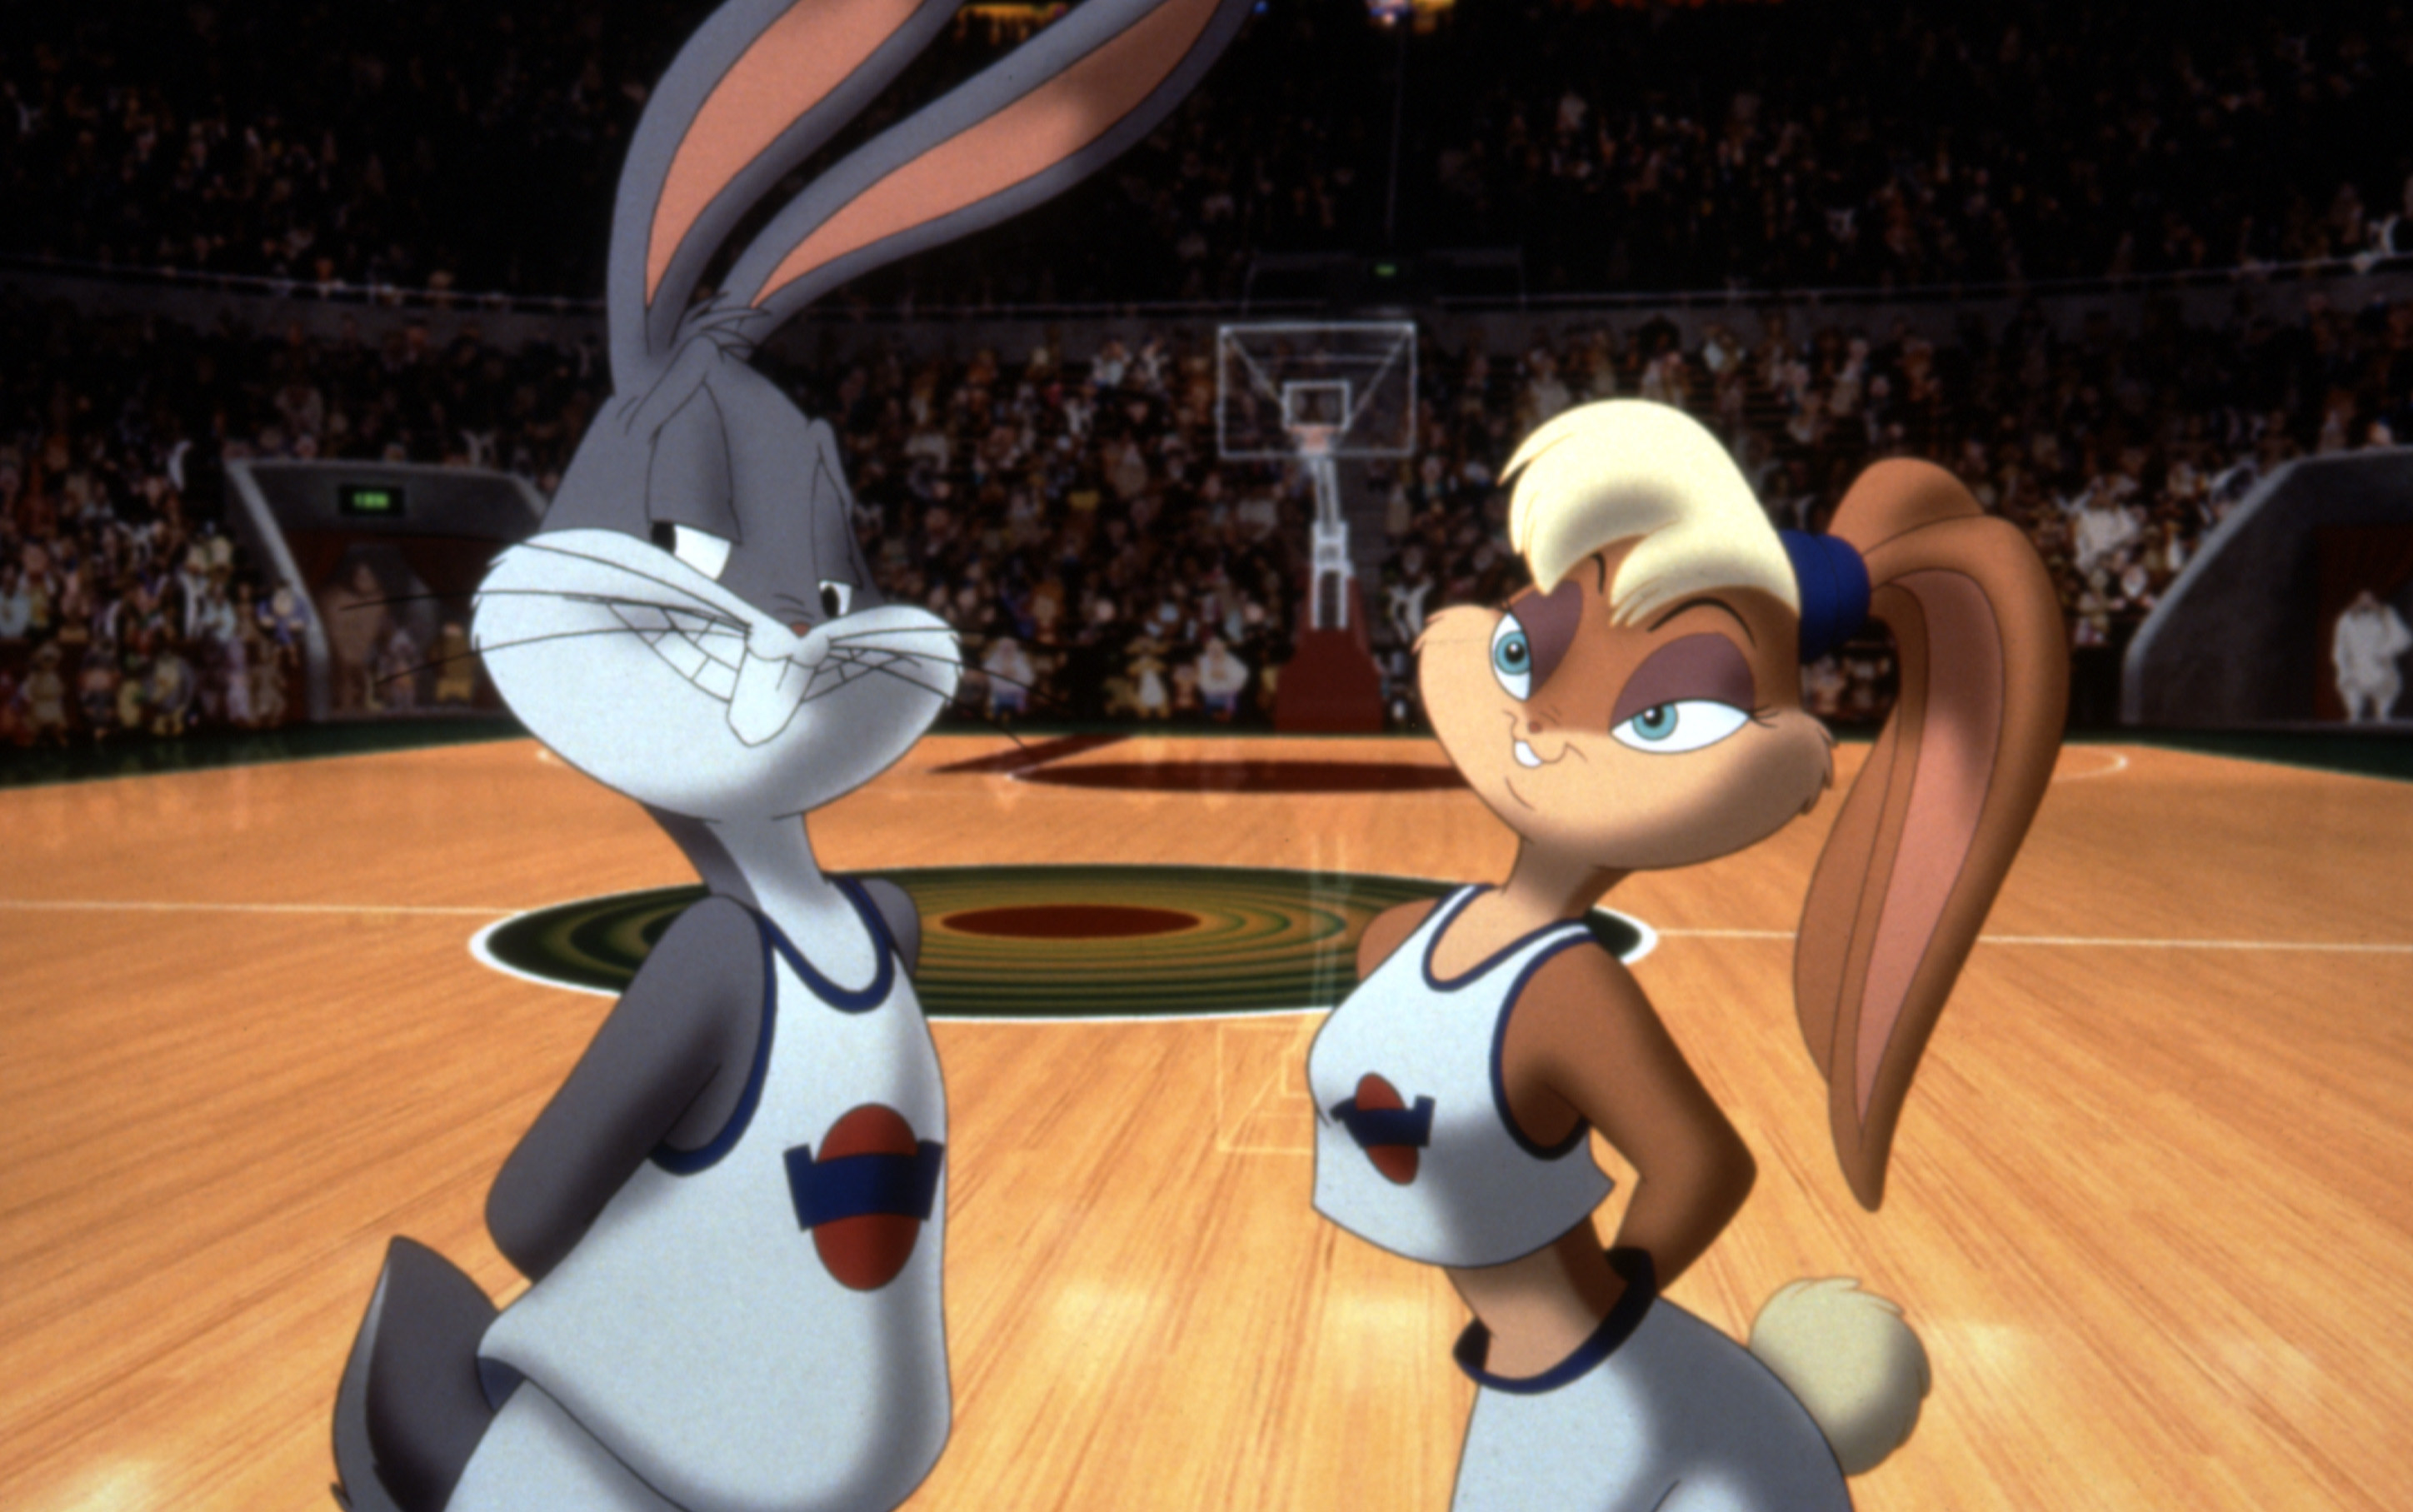 The old Lola Bunny wears a crop top while posing with Bugs Bunny